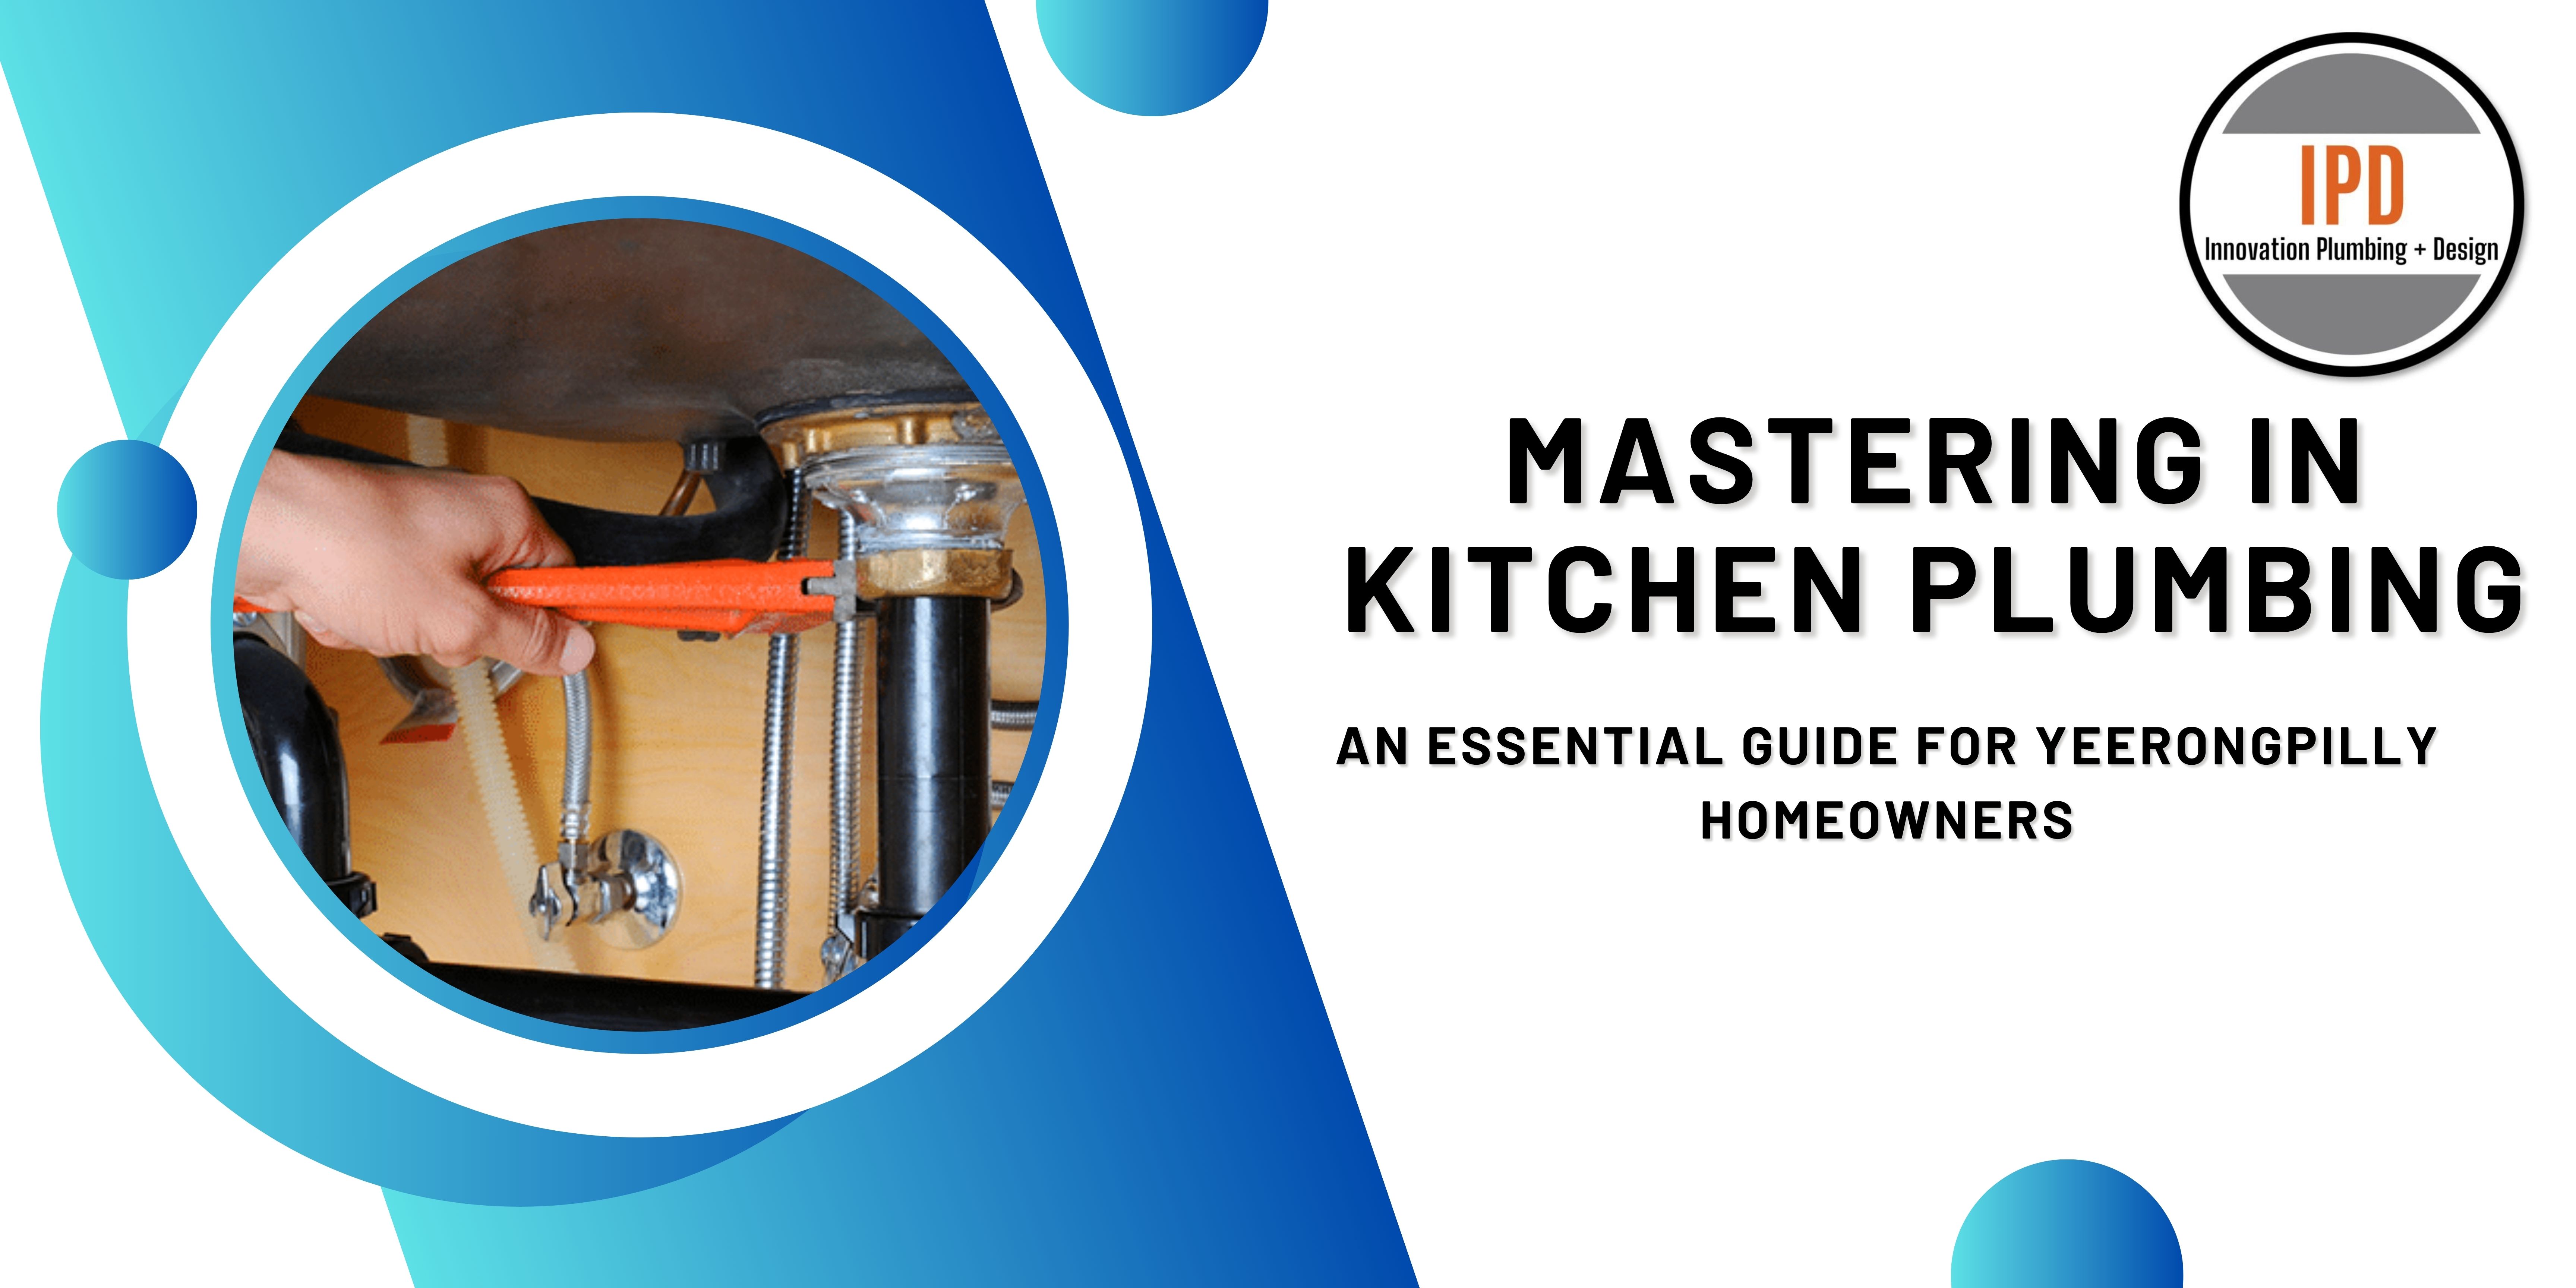 Mastering Kitchen Plumbing: An Essential Guide for Yeerongpilly Homeowners 